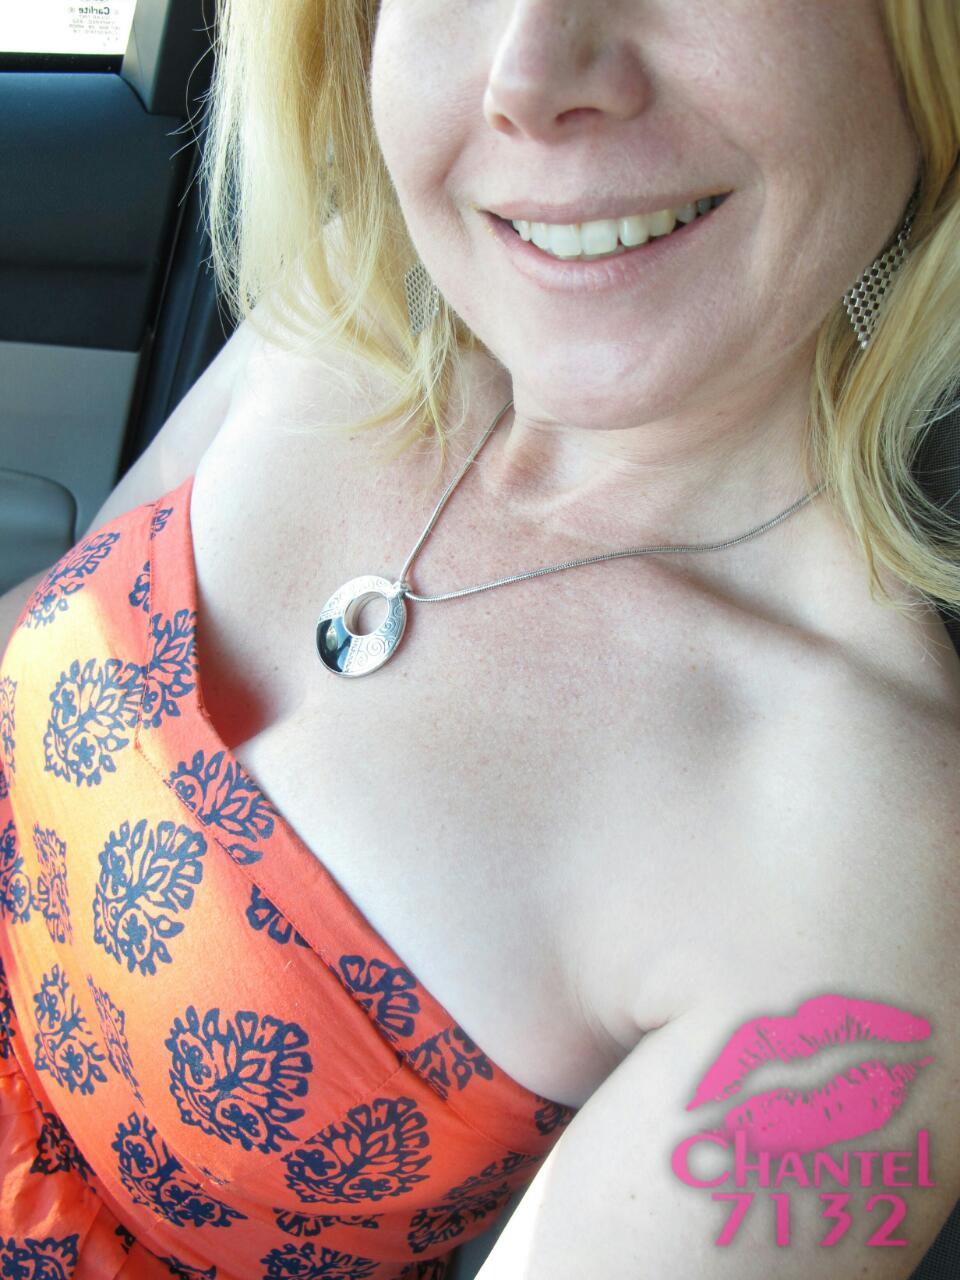 smileslaughtersex:  Road trip to shoot pics this weekend.  Hubby shot pics of me